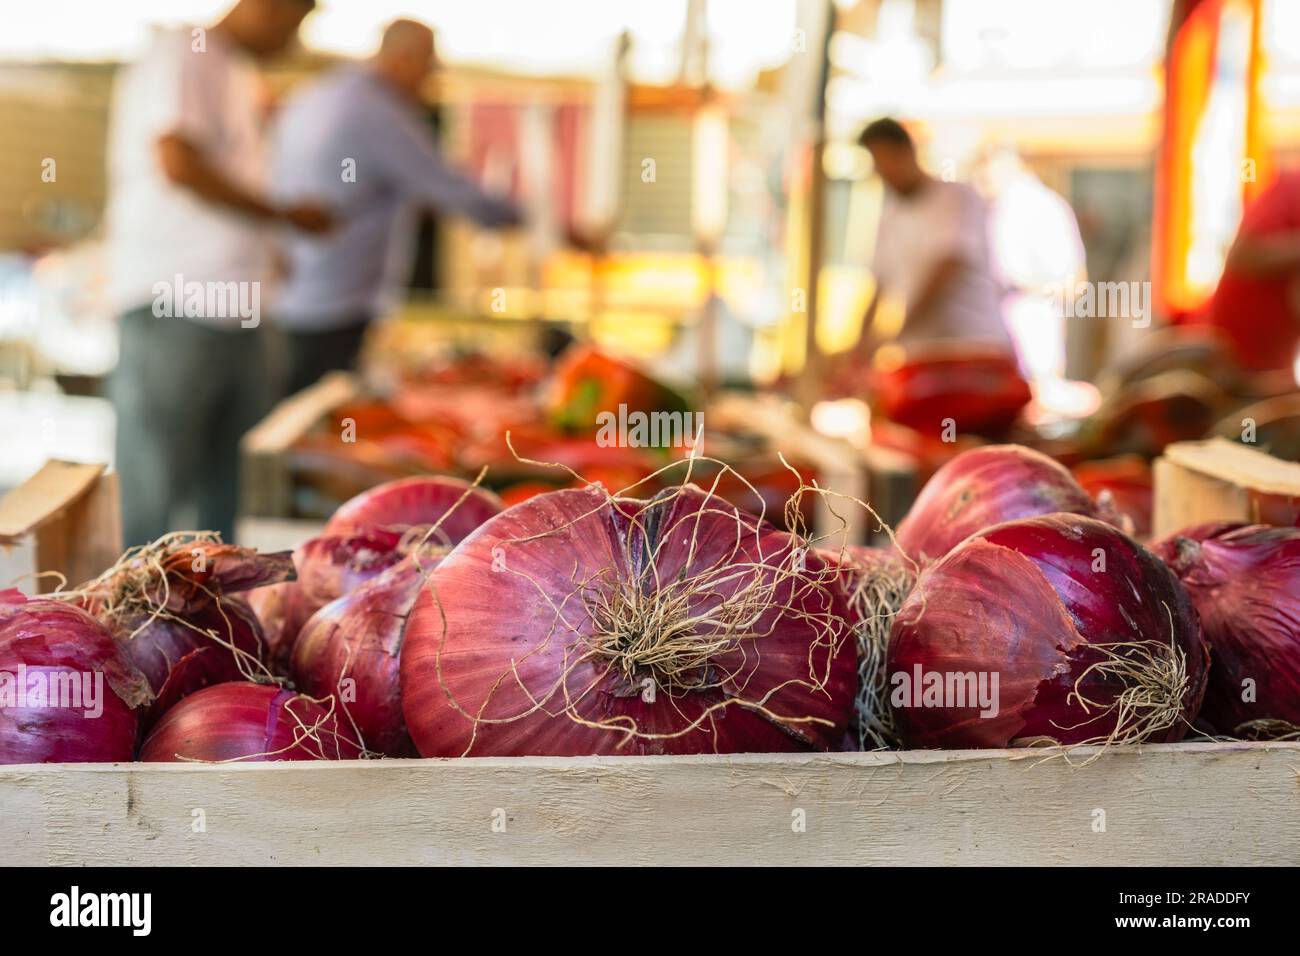 Red onion on a street food market Ballaro in Palermo Sicily, vegetable stand with blurred background Stock Photo